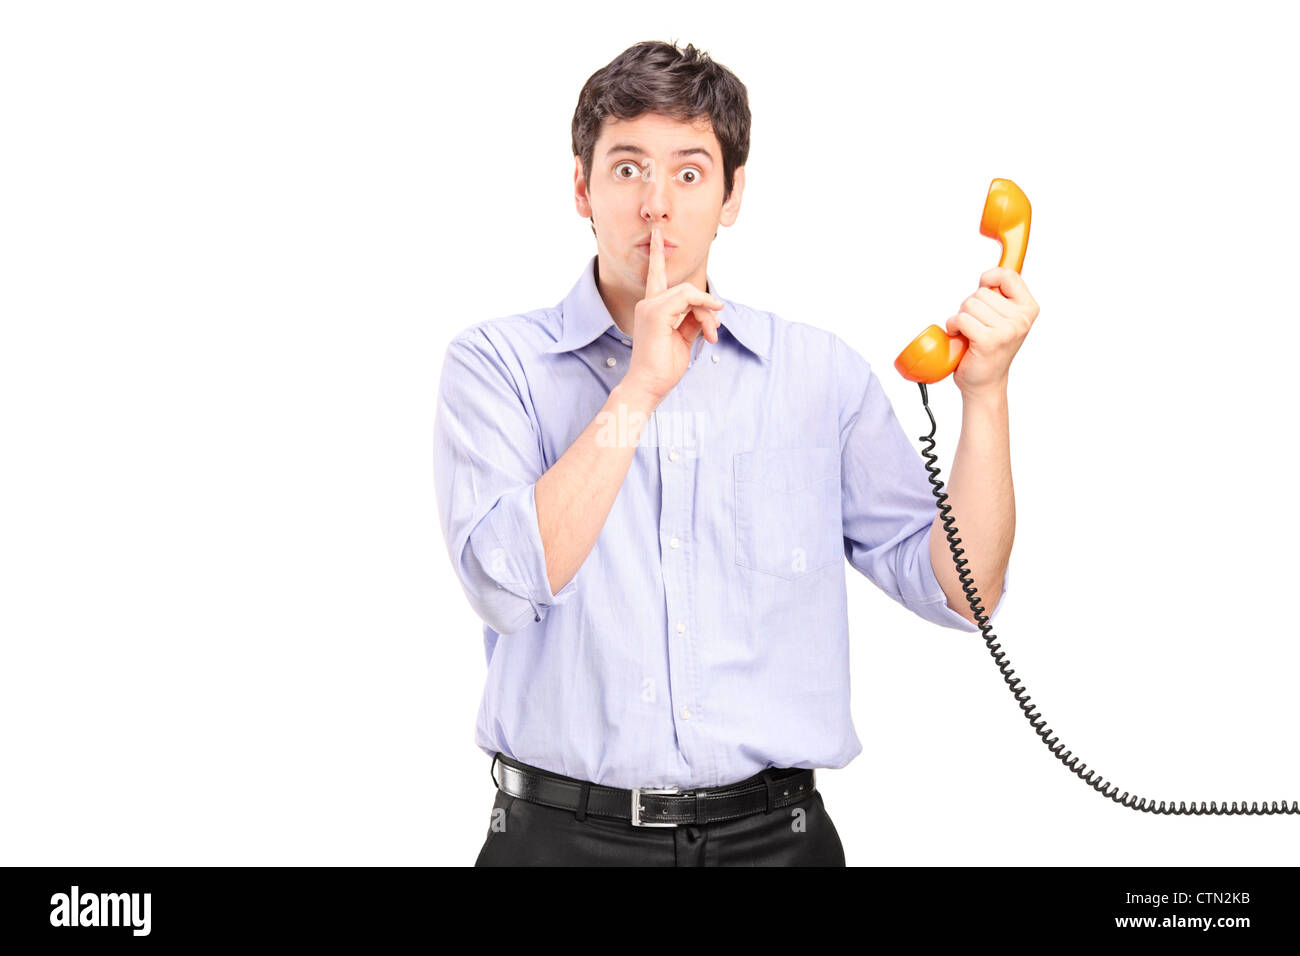 A man holding a telephone and gesturing silence isolated on white background Stock Photo